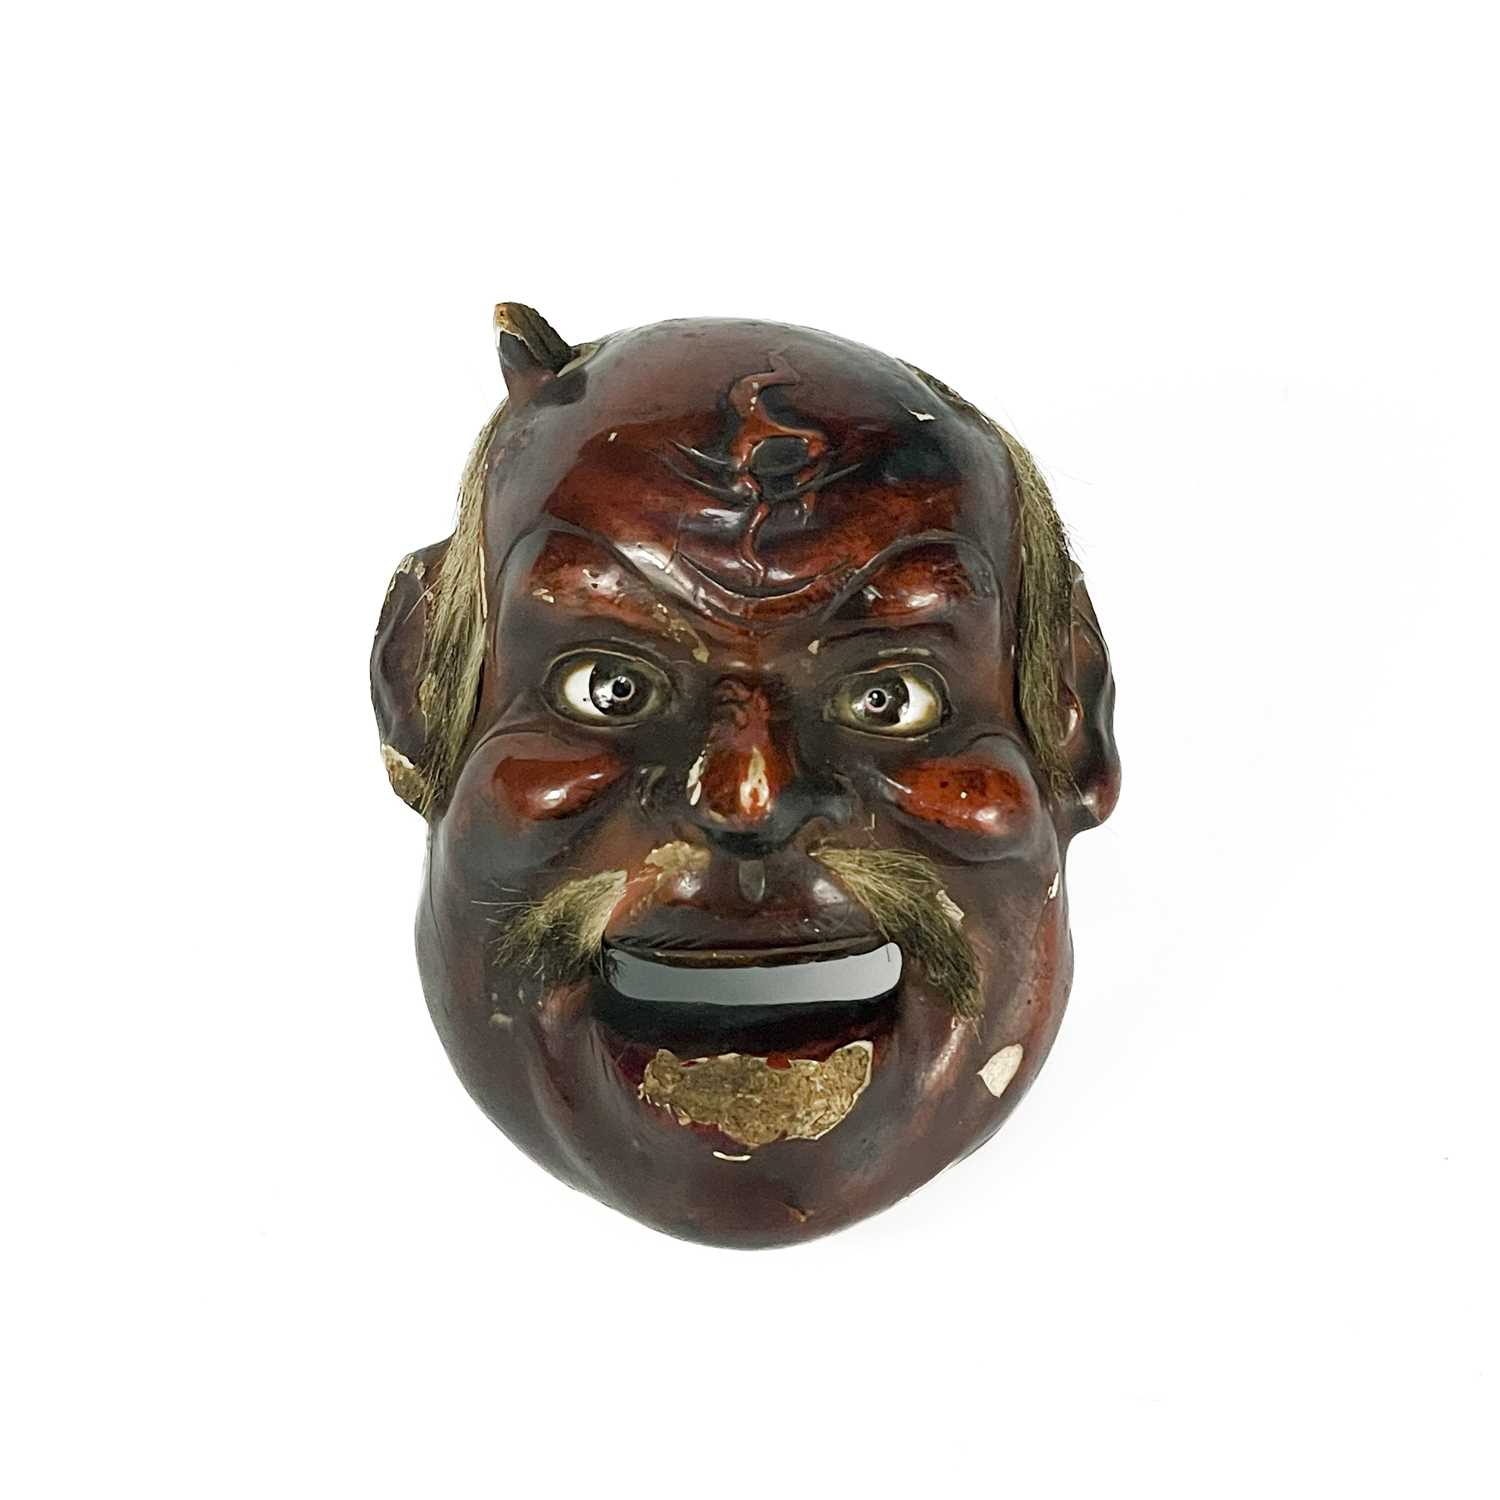 Lot 41 - A small Japanese lacquered wood Noh mask, 19th century.